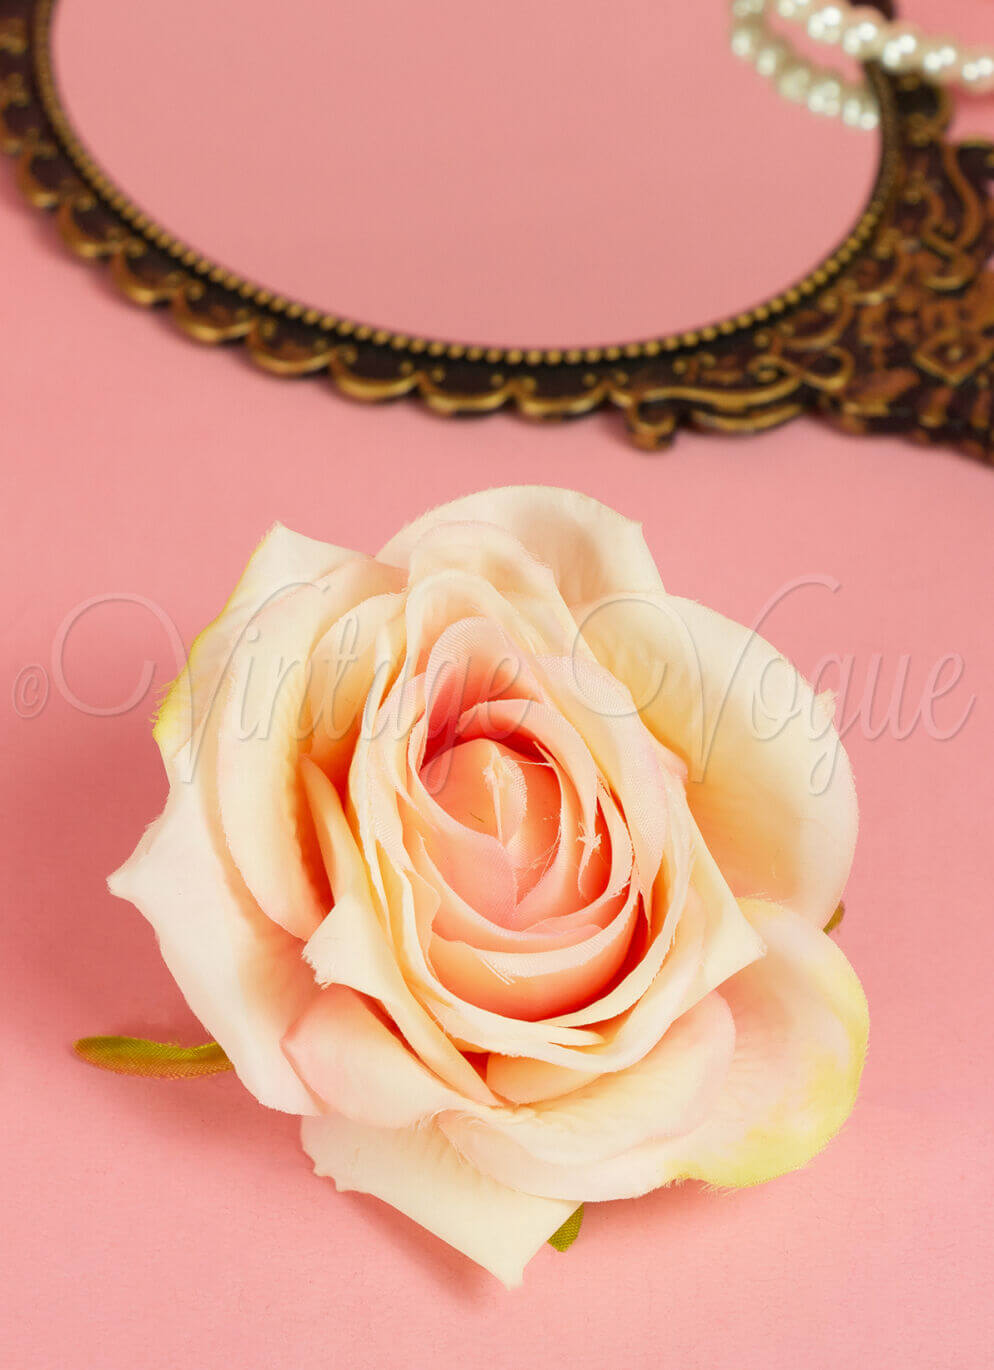 Banned Vintage Retro Haarblume Rose Haarclip "Scented Love" in Blush